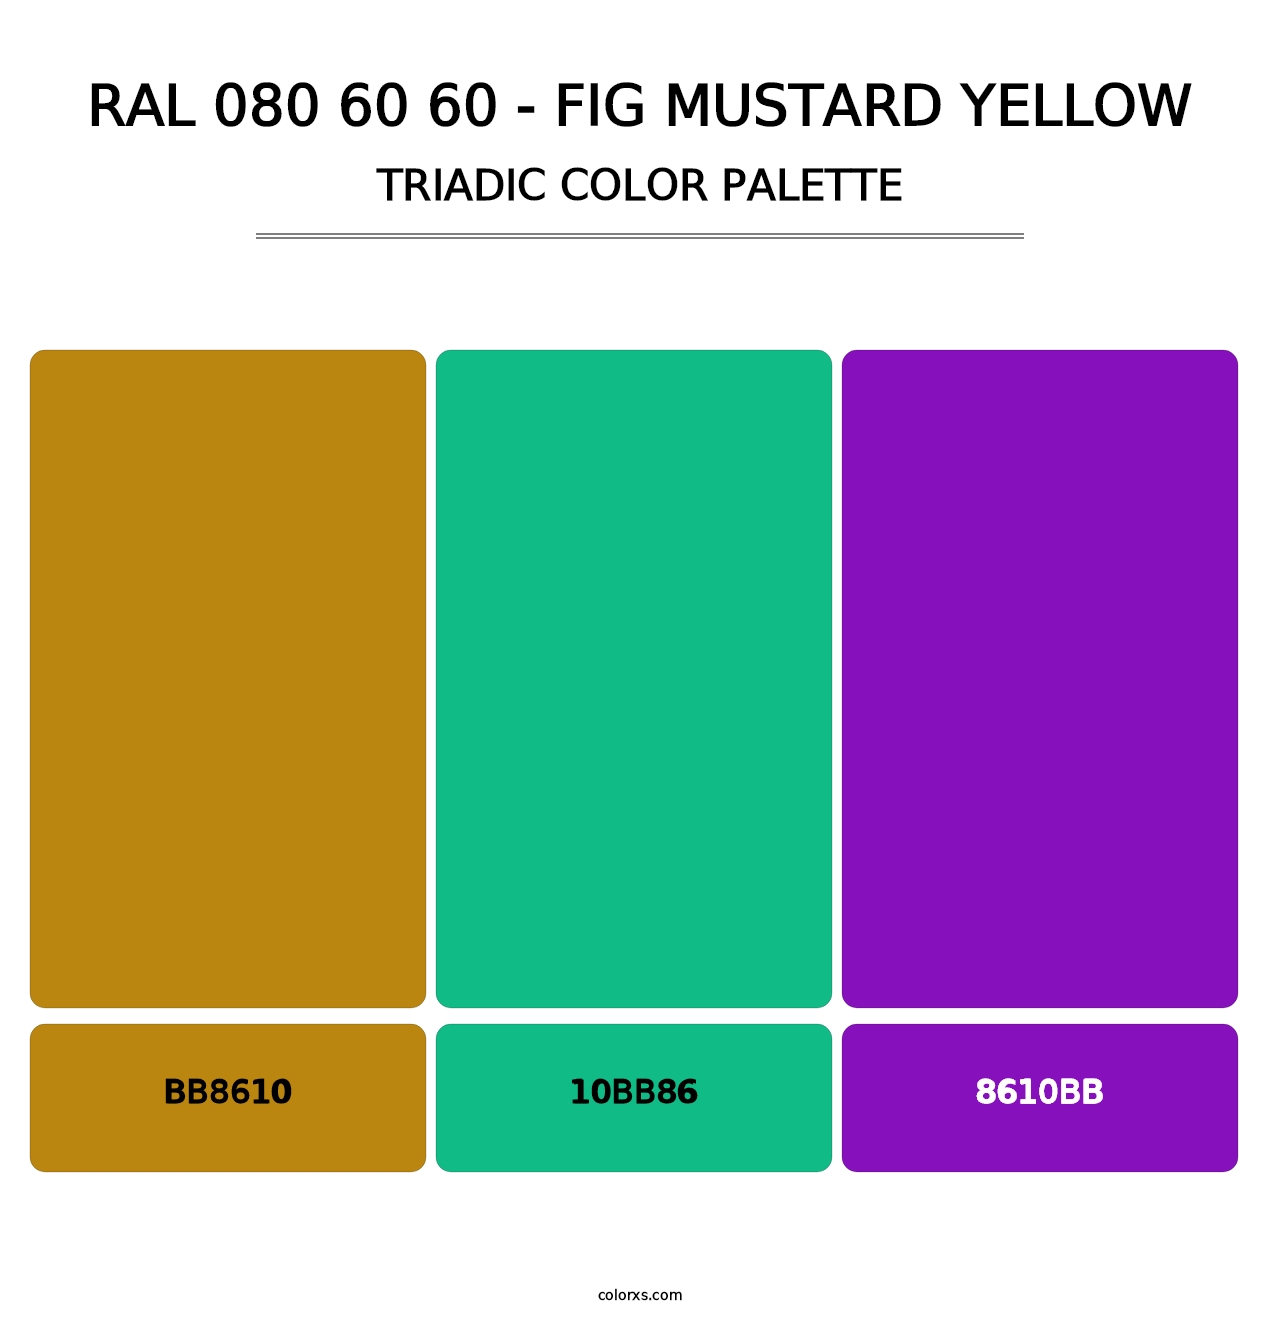 RAL 080 60 60 - Fig Mustard Yellow - Triadic Color Palette